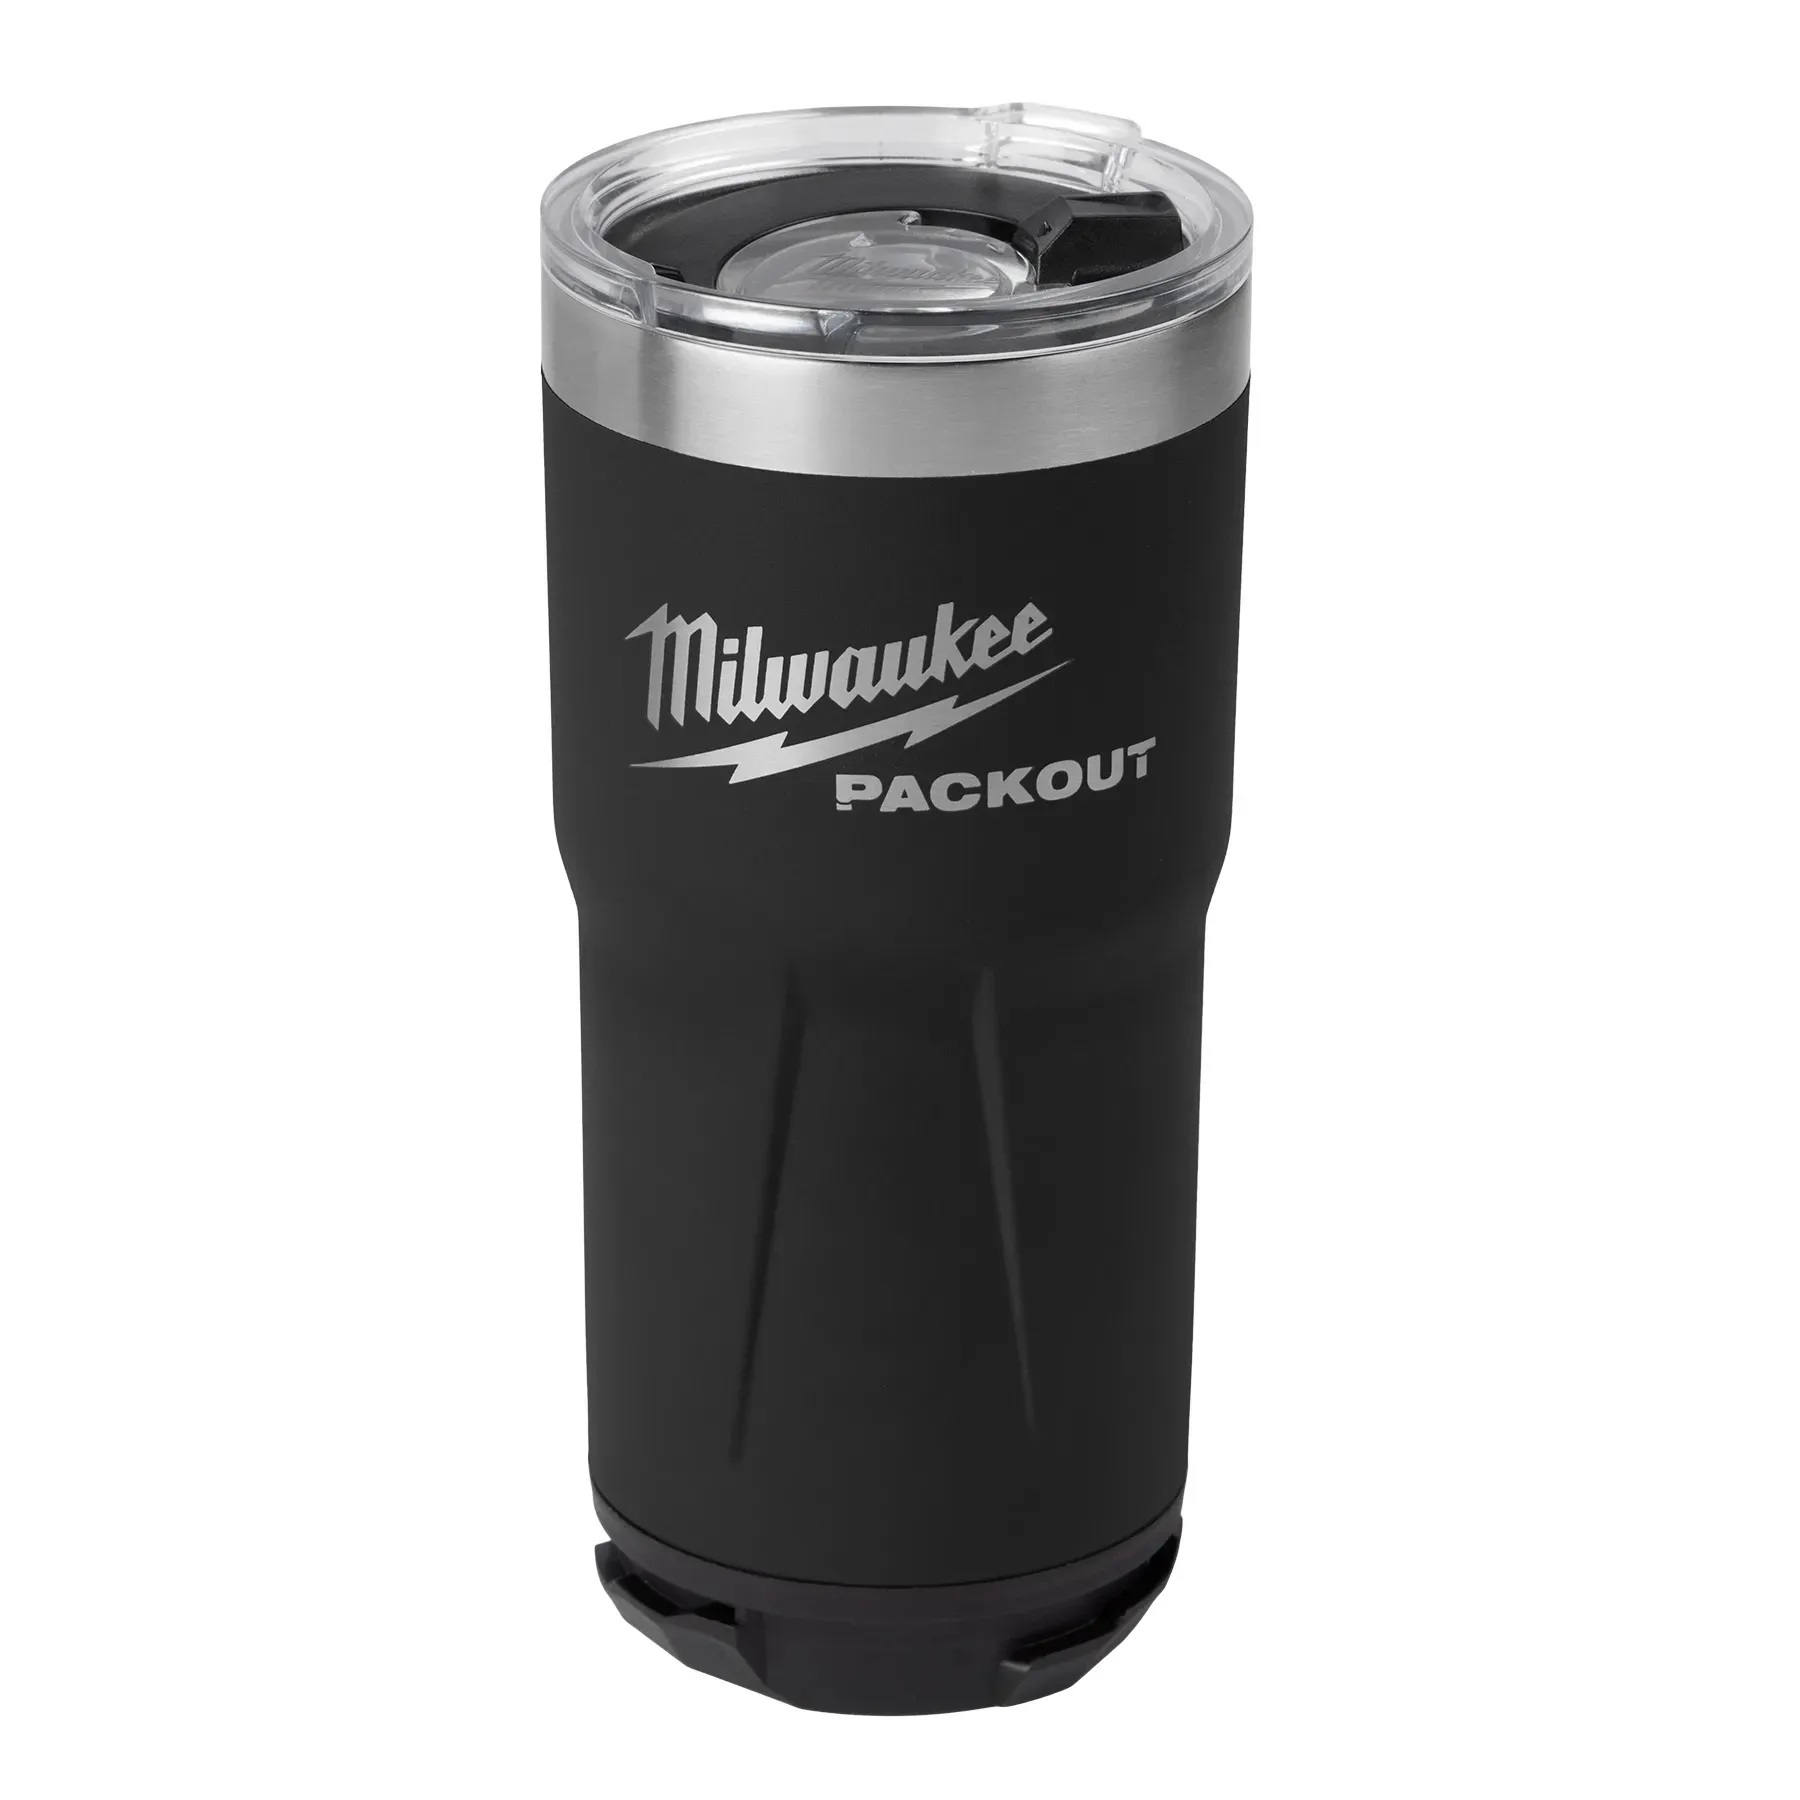 #2 - Milwaukee PACKOUT termokop 591ml i sort - Special edition